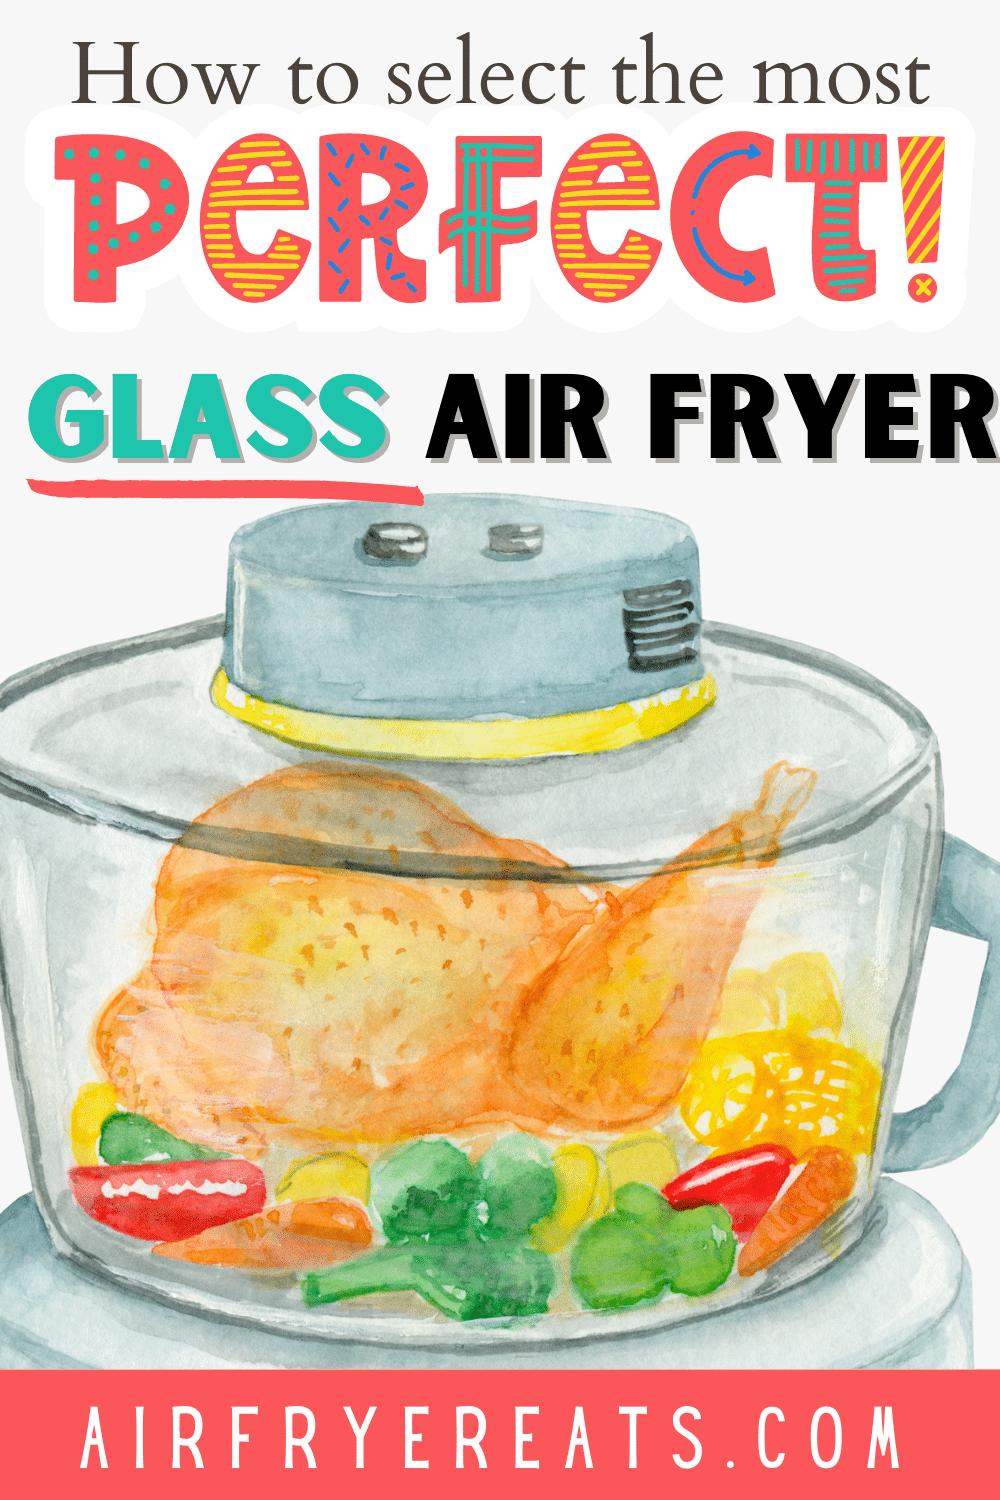 Looking for the right GLASS AIR FRYER for your home? We share why Glass Air Fryers are great and which models you should check out. via @vegetarianmamma